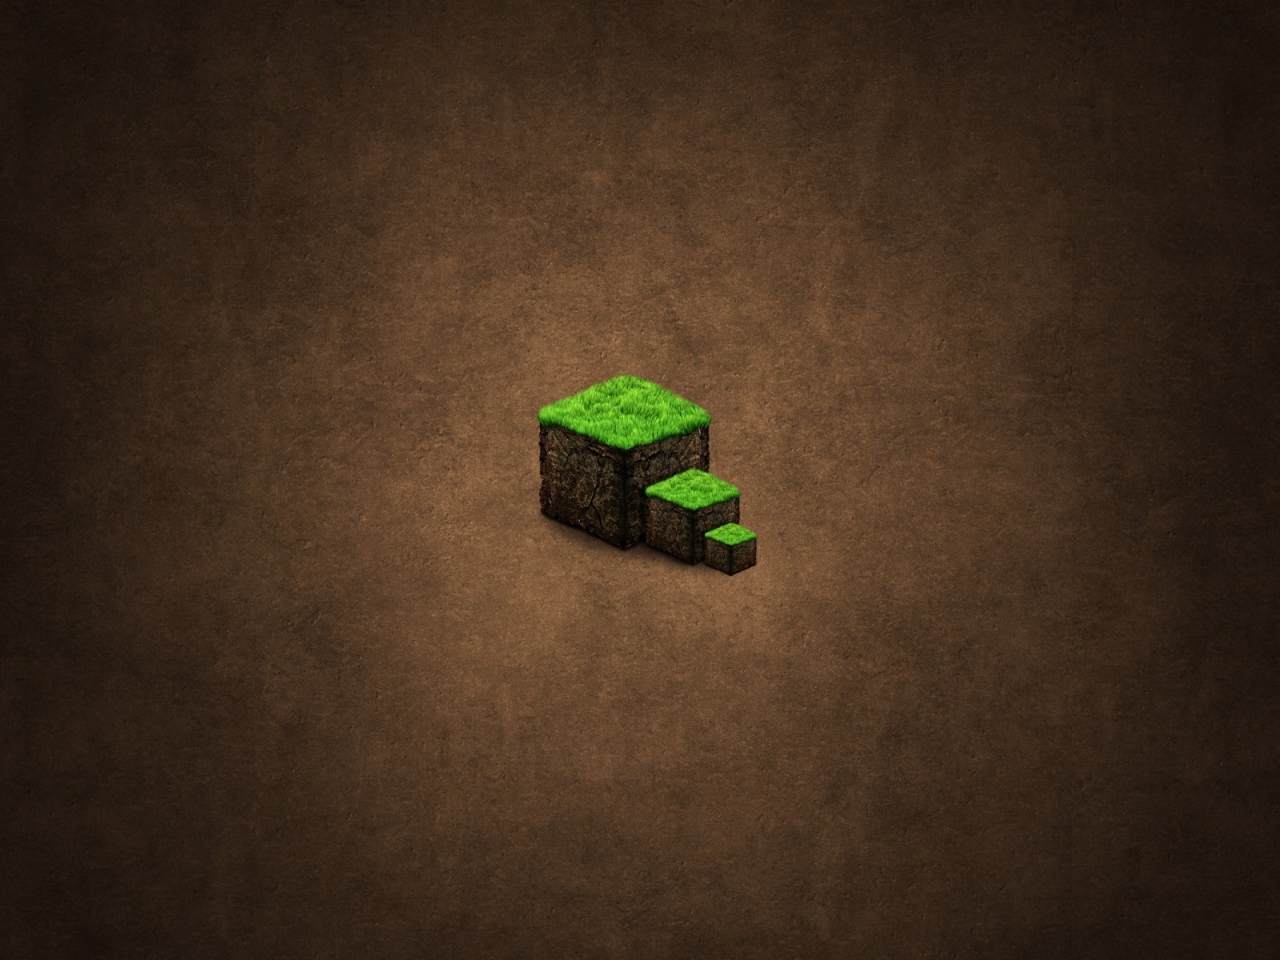 Minecraft Green Cubes for 1280 x 960 resolution